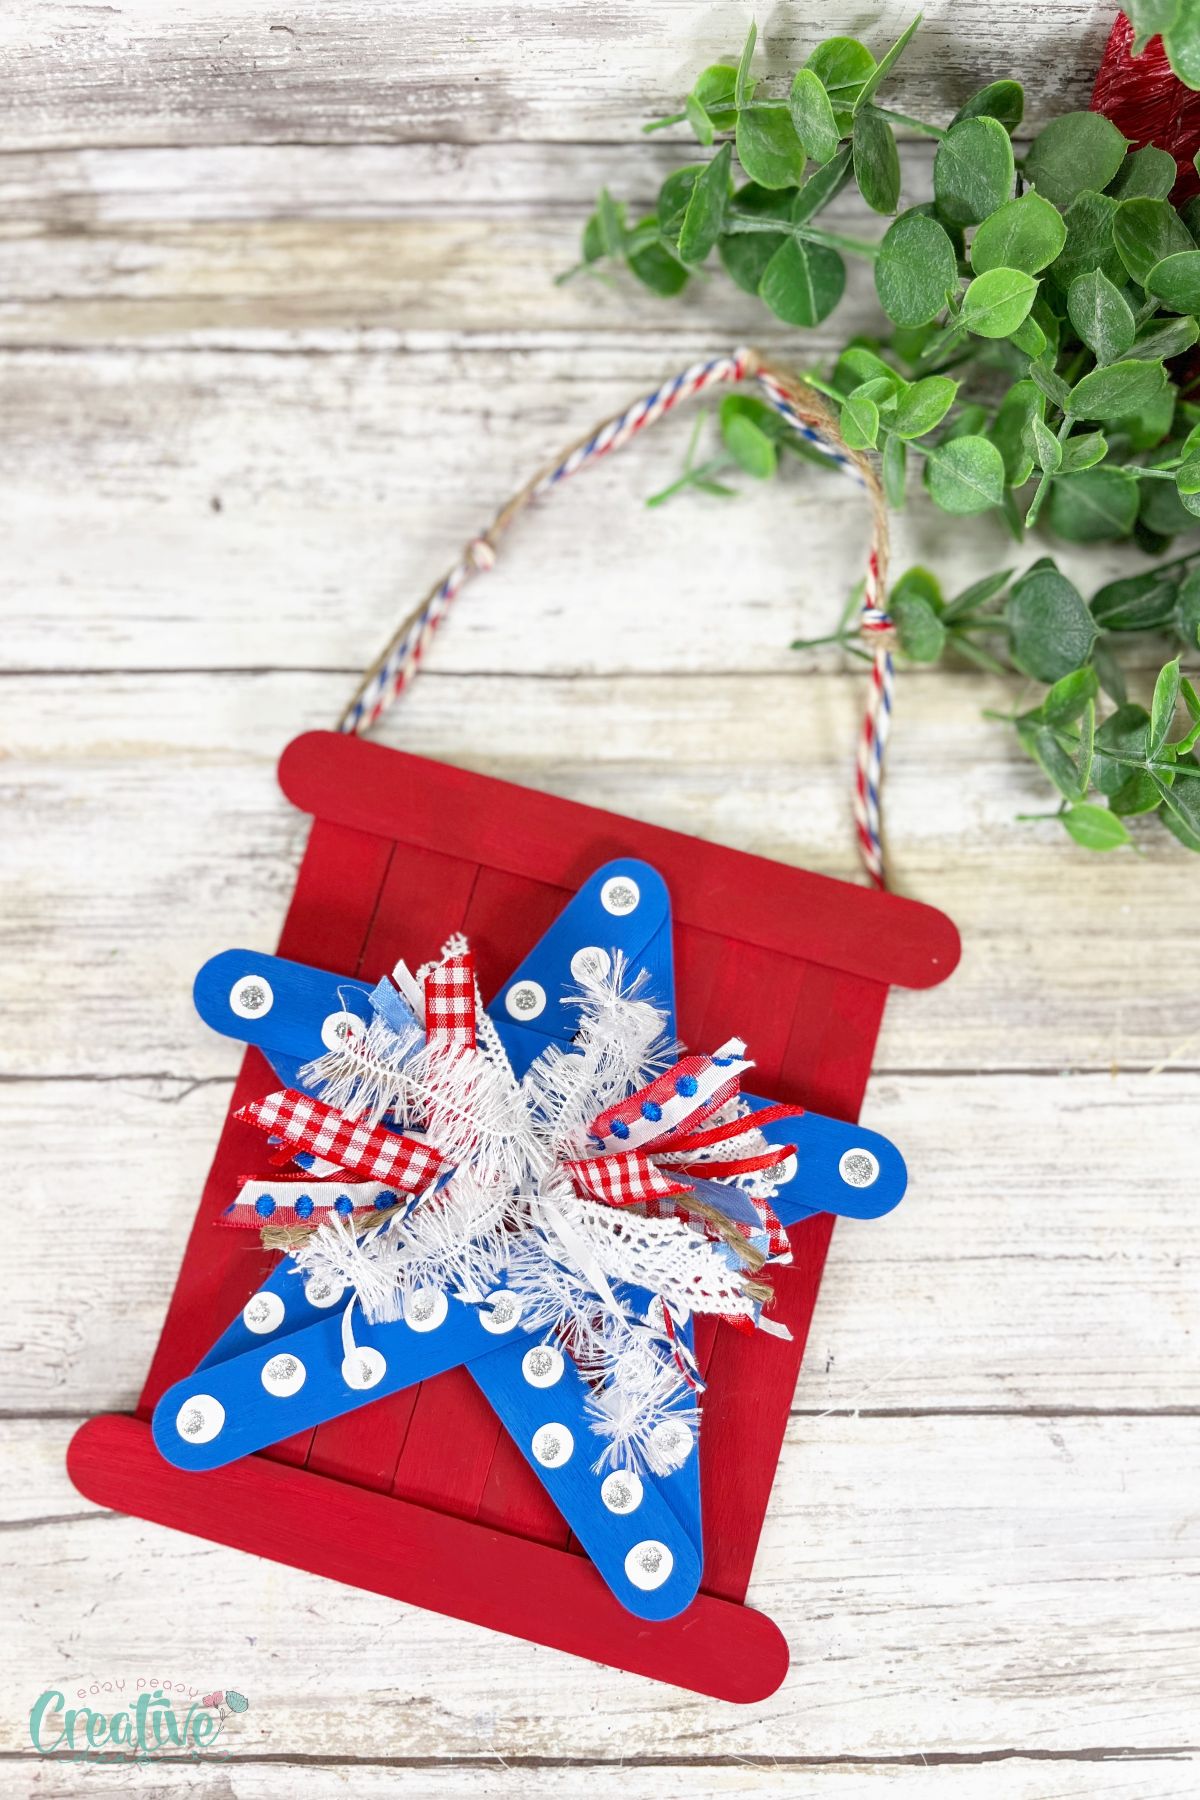 This simple, inexpensive DIY 4th of July star is fun and versatile, perfect for adding a patriotic touch to your home décor or as a handmade gift.